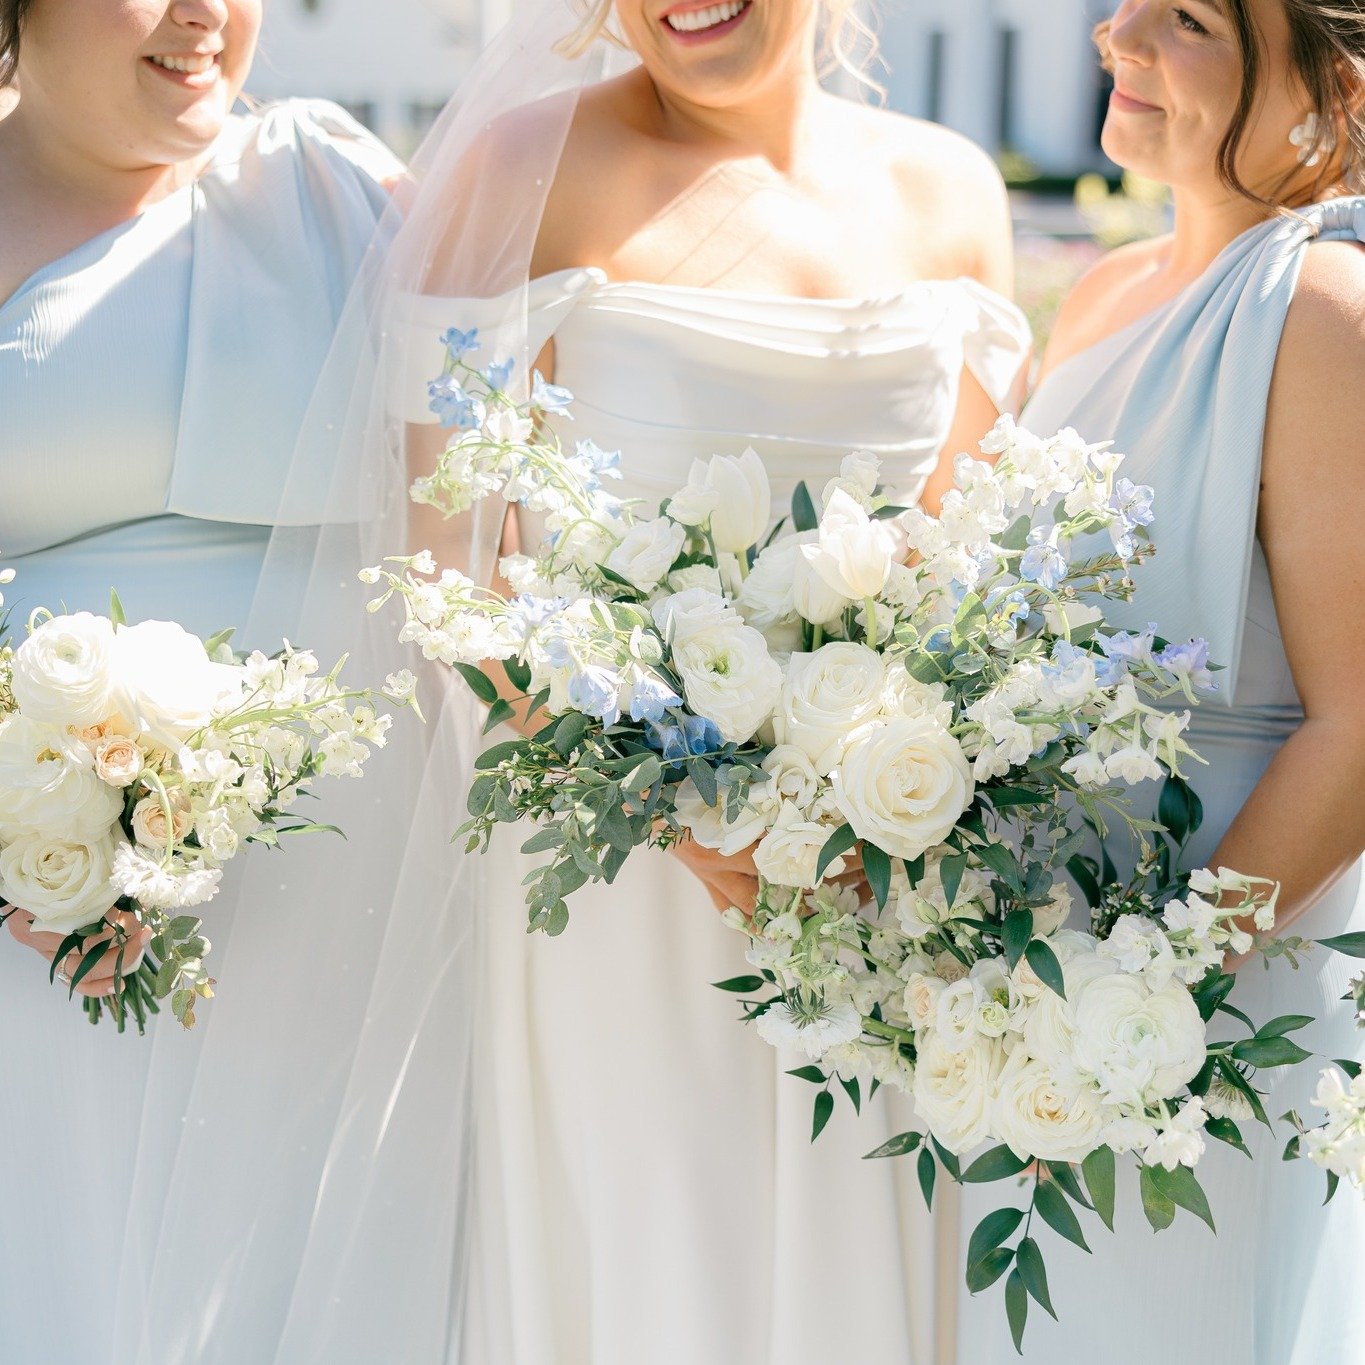 When it comes to your florals, you can never go wrong with a classic white and greenery combination, but if you're looking to elevate it just a touch more add in pops of &quot;something blue.&quot;

Venue: @country_club_of_landfall
Photography: @whit